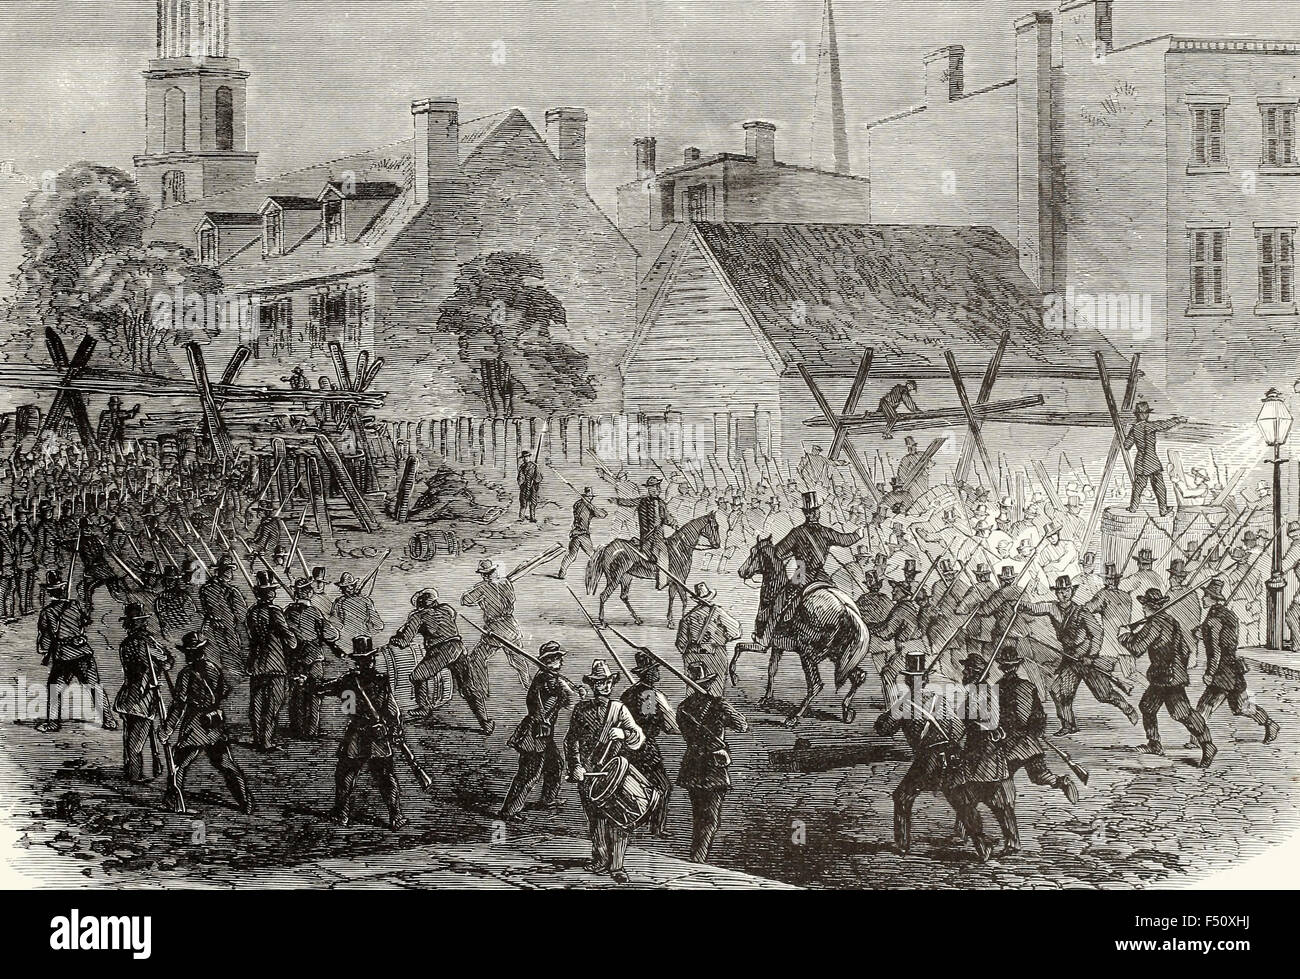 The Invasion of Maryland - Citizens of Baltimore barricading the streets, Monday Evening, June 29th, 1863. USA Civil War Stock Photo